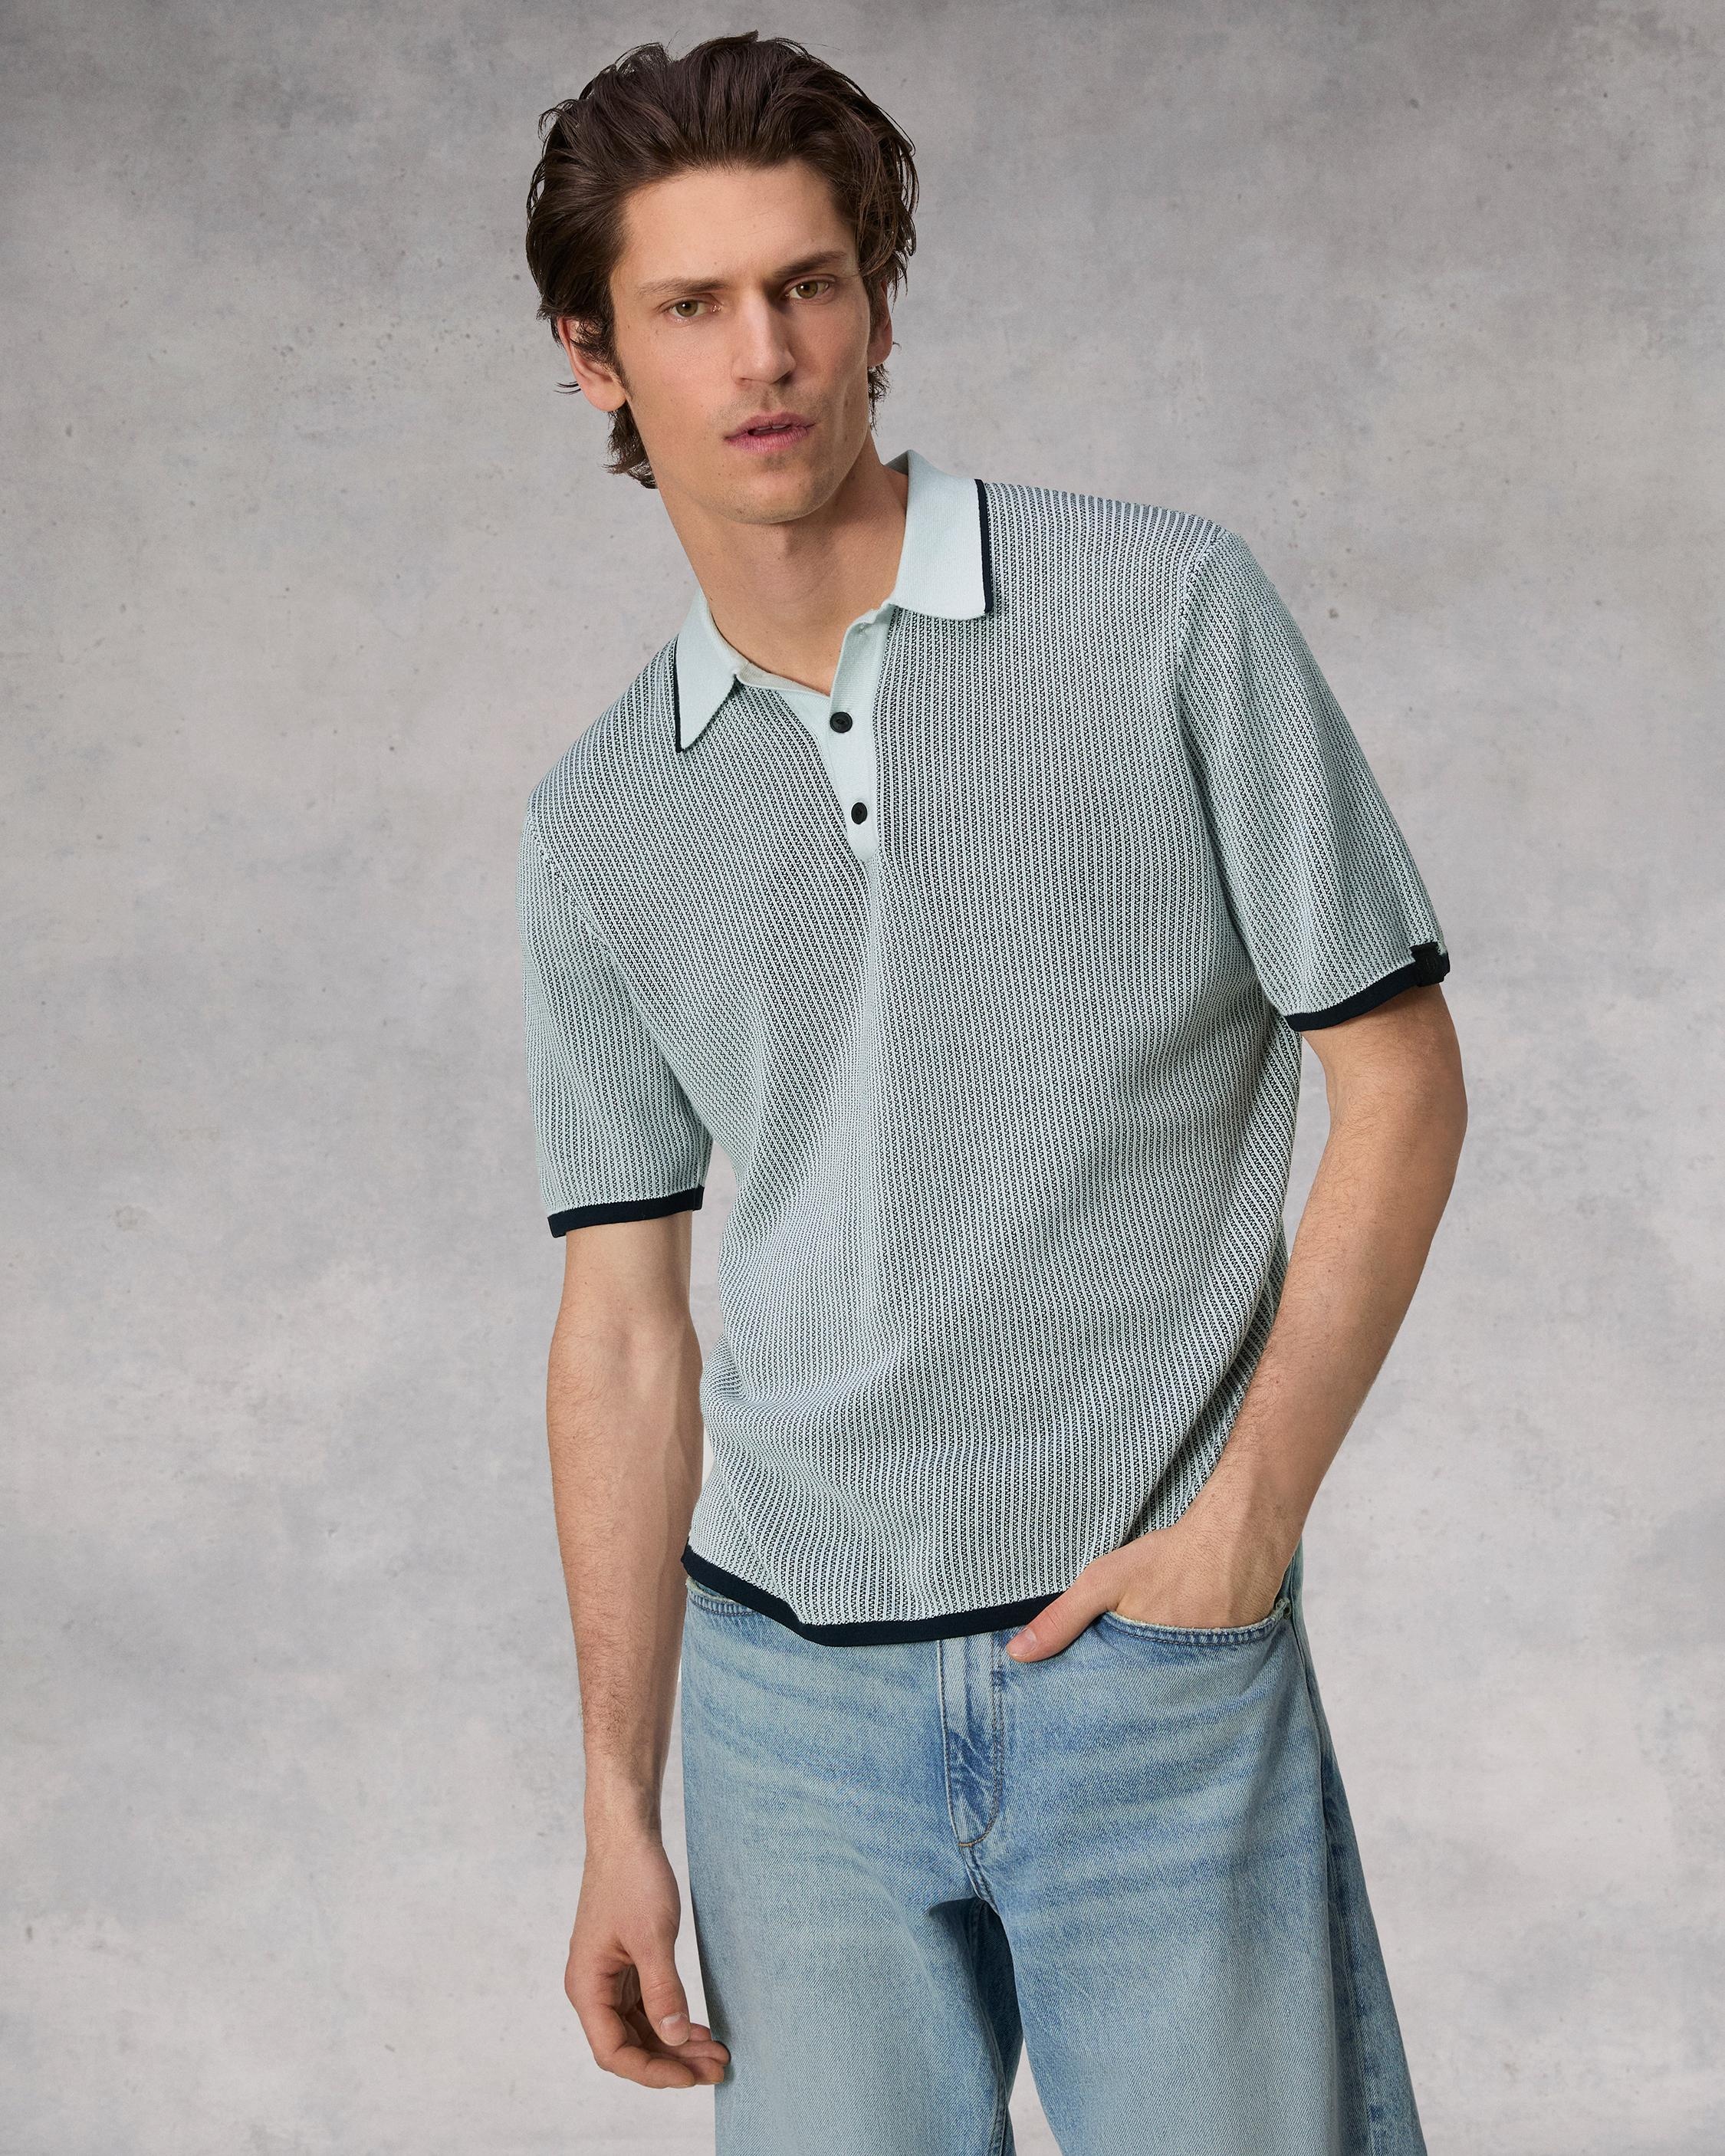 Harvey Polo
Classic Fit - 2